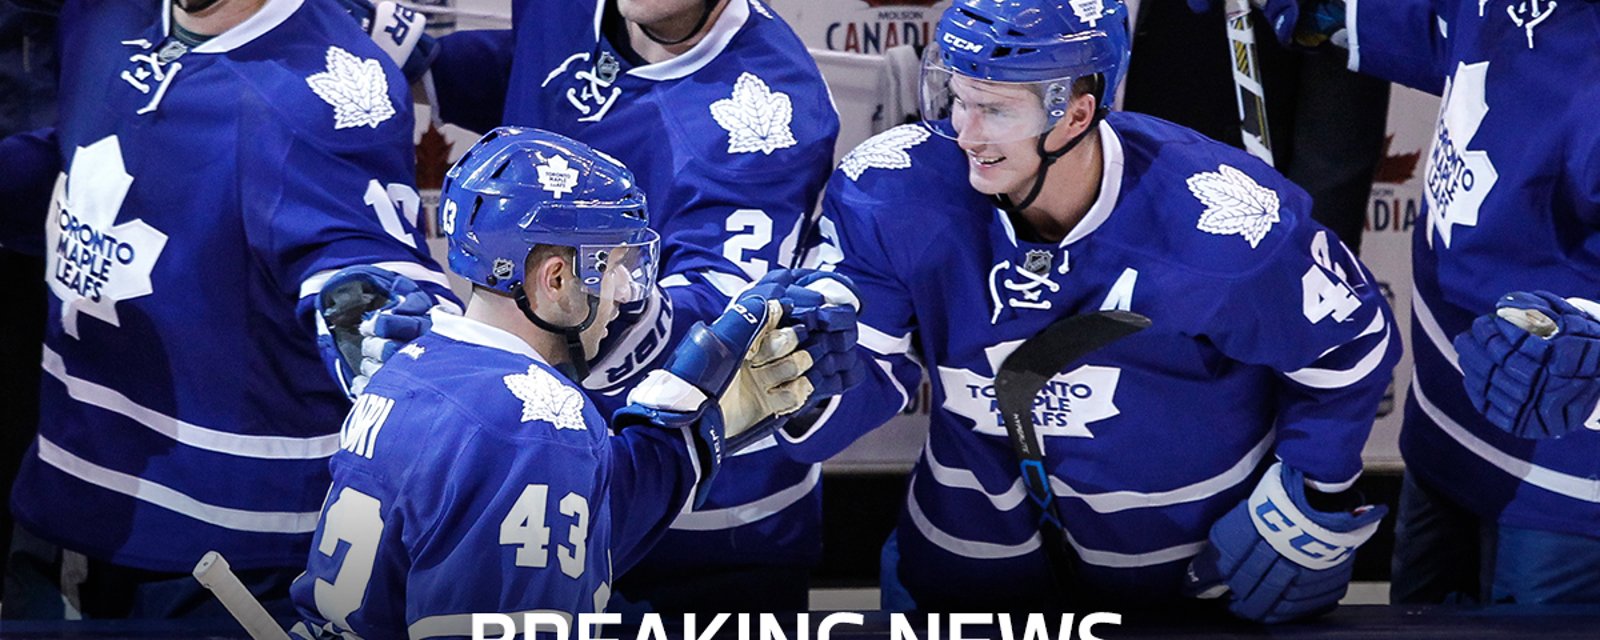 Breaking: Bad news for the Maple Leafs!